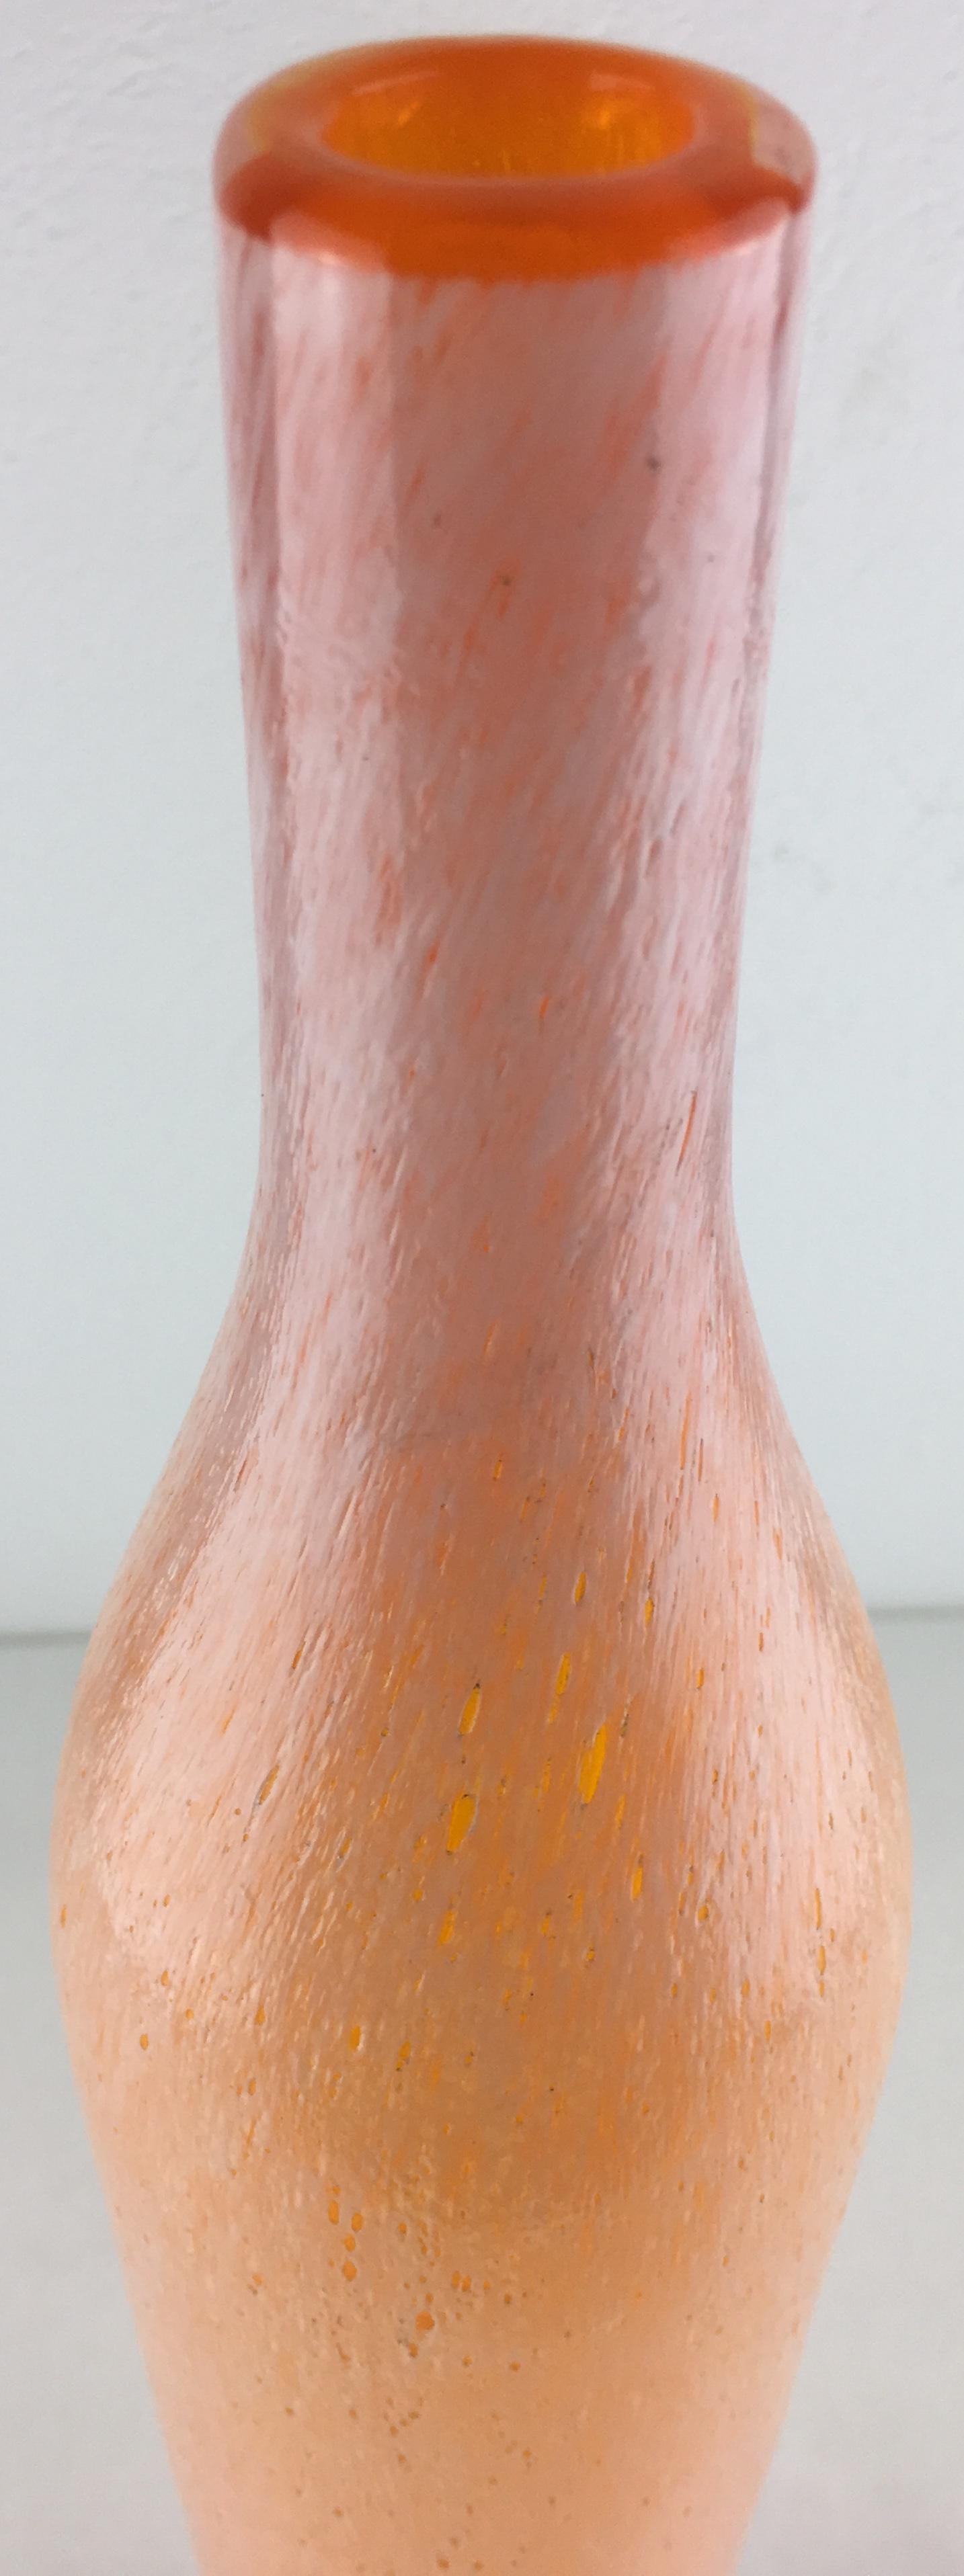 An exquisite hand blown Murano art glass vase in a soft orange, very pleasing to the eye. 

This Italian art glass vase features dots with flecks and a small opening perfect for a single flower or perhaps two. Similar to pieces from the Italian